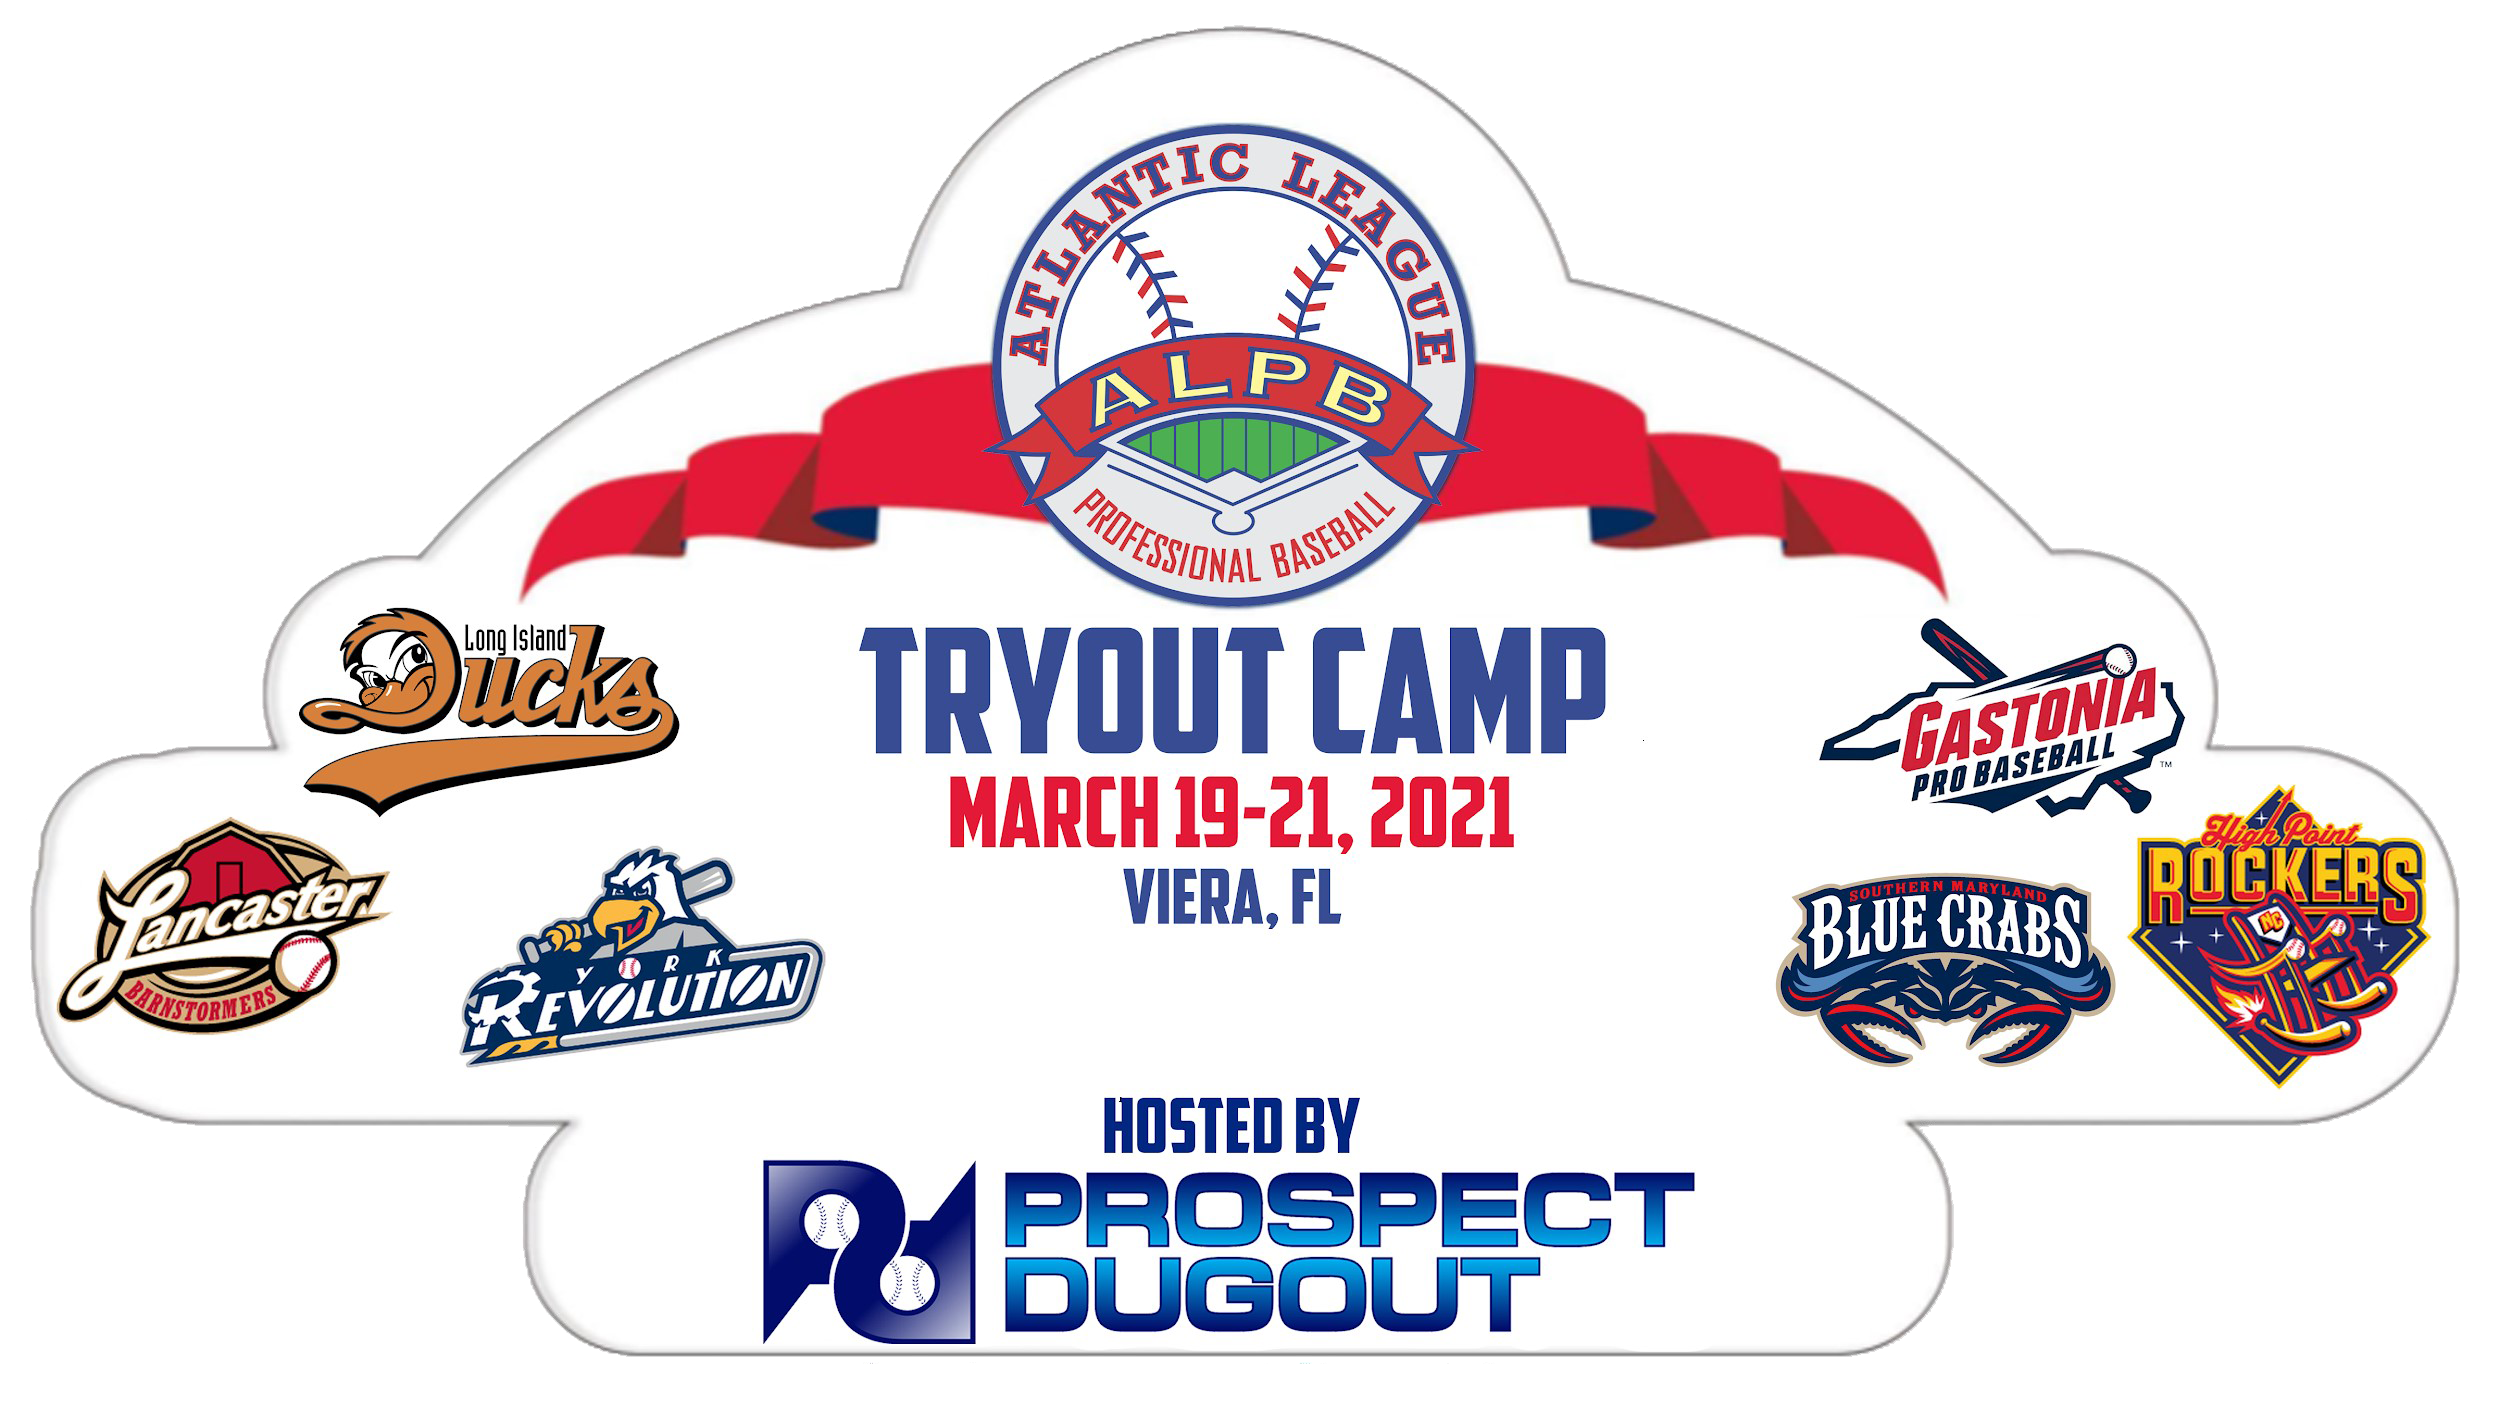 ATLANTIC LEAGUE, PROSPECT DUGOUT ANNOUNCE  SPRING PRO BASEBALL TRYOUT CAMP